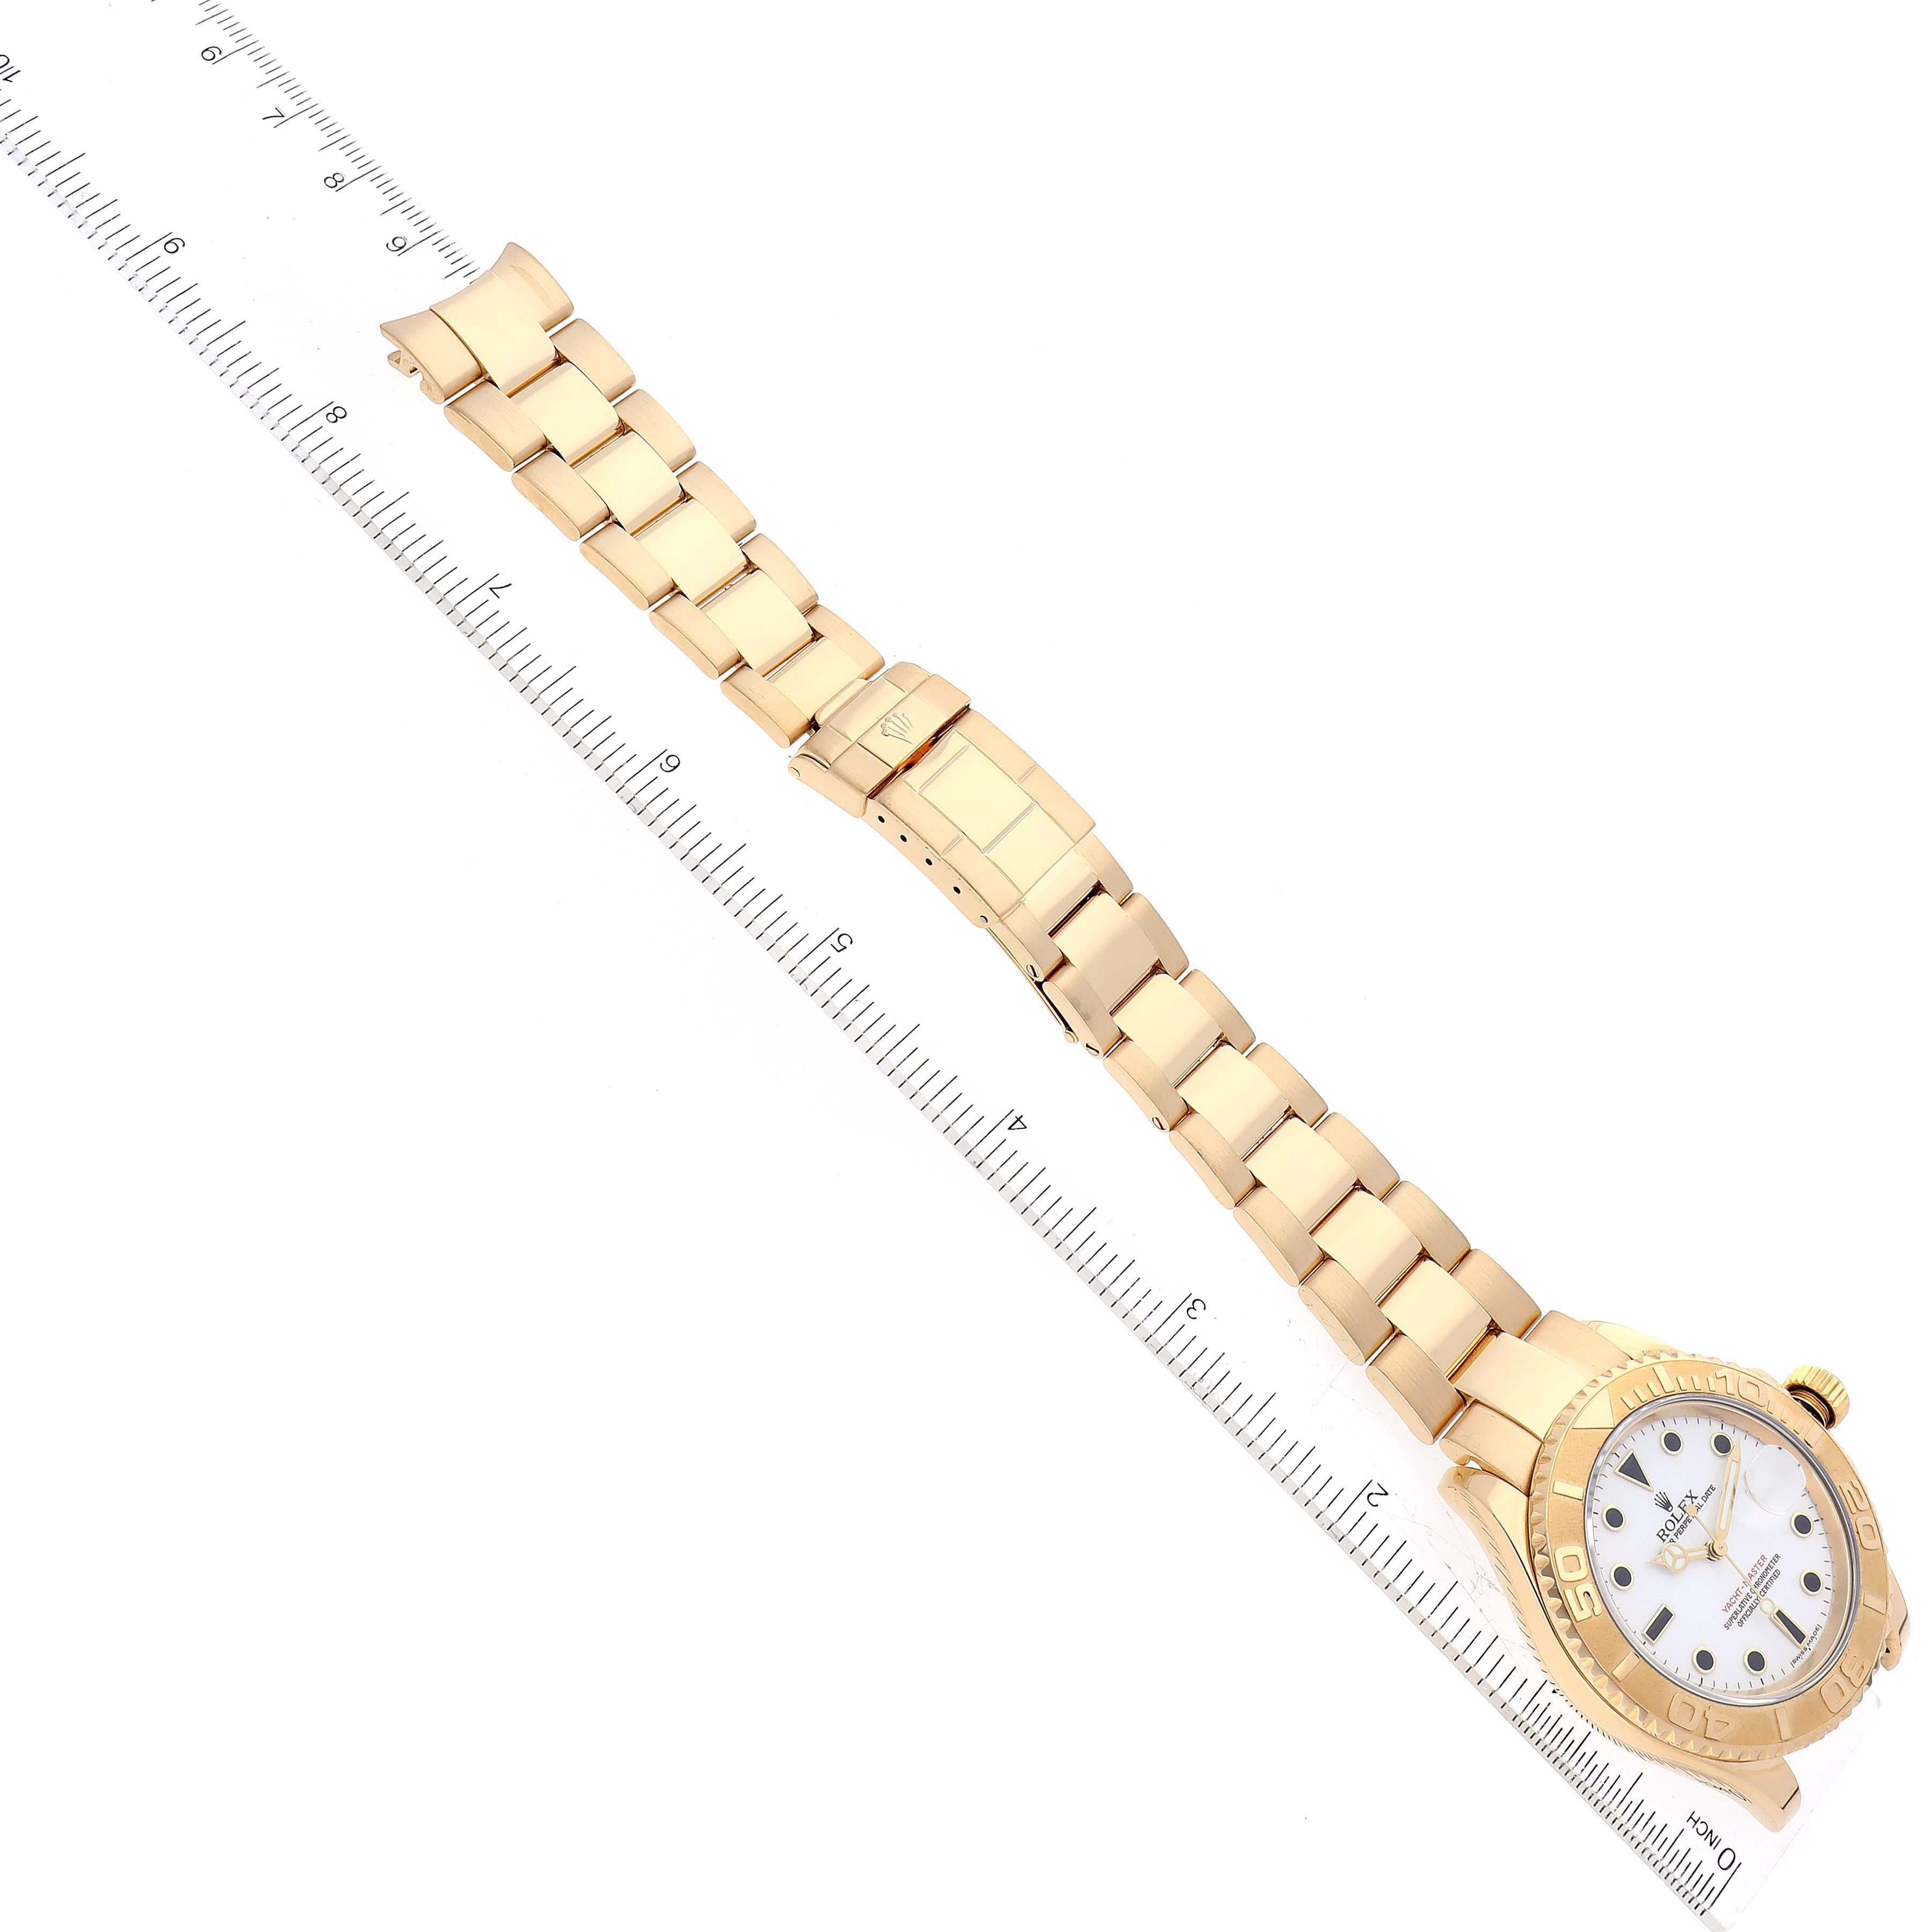 Rolex Yachtmaster 40mm Yellow Gold White Dial Mens Watch 16628 Box Papers 6